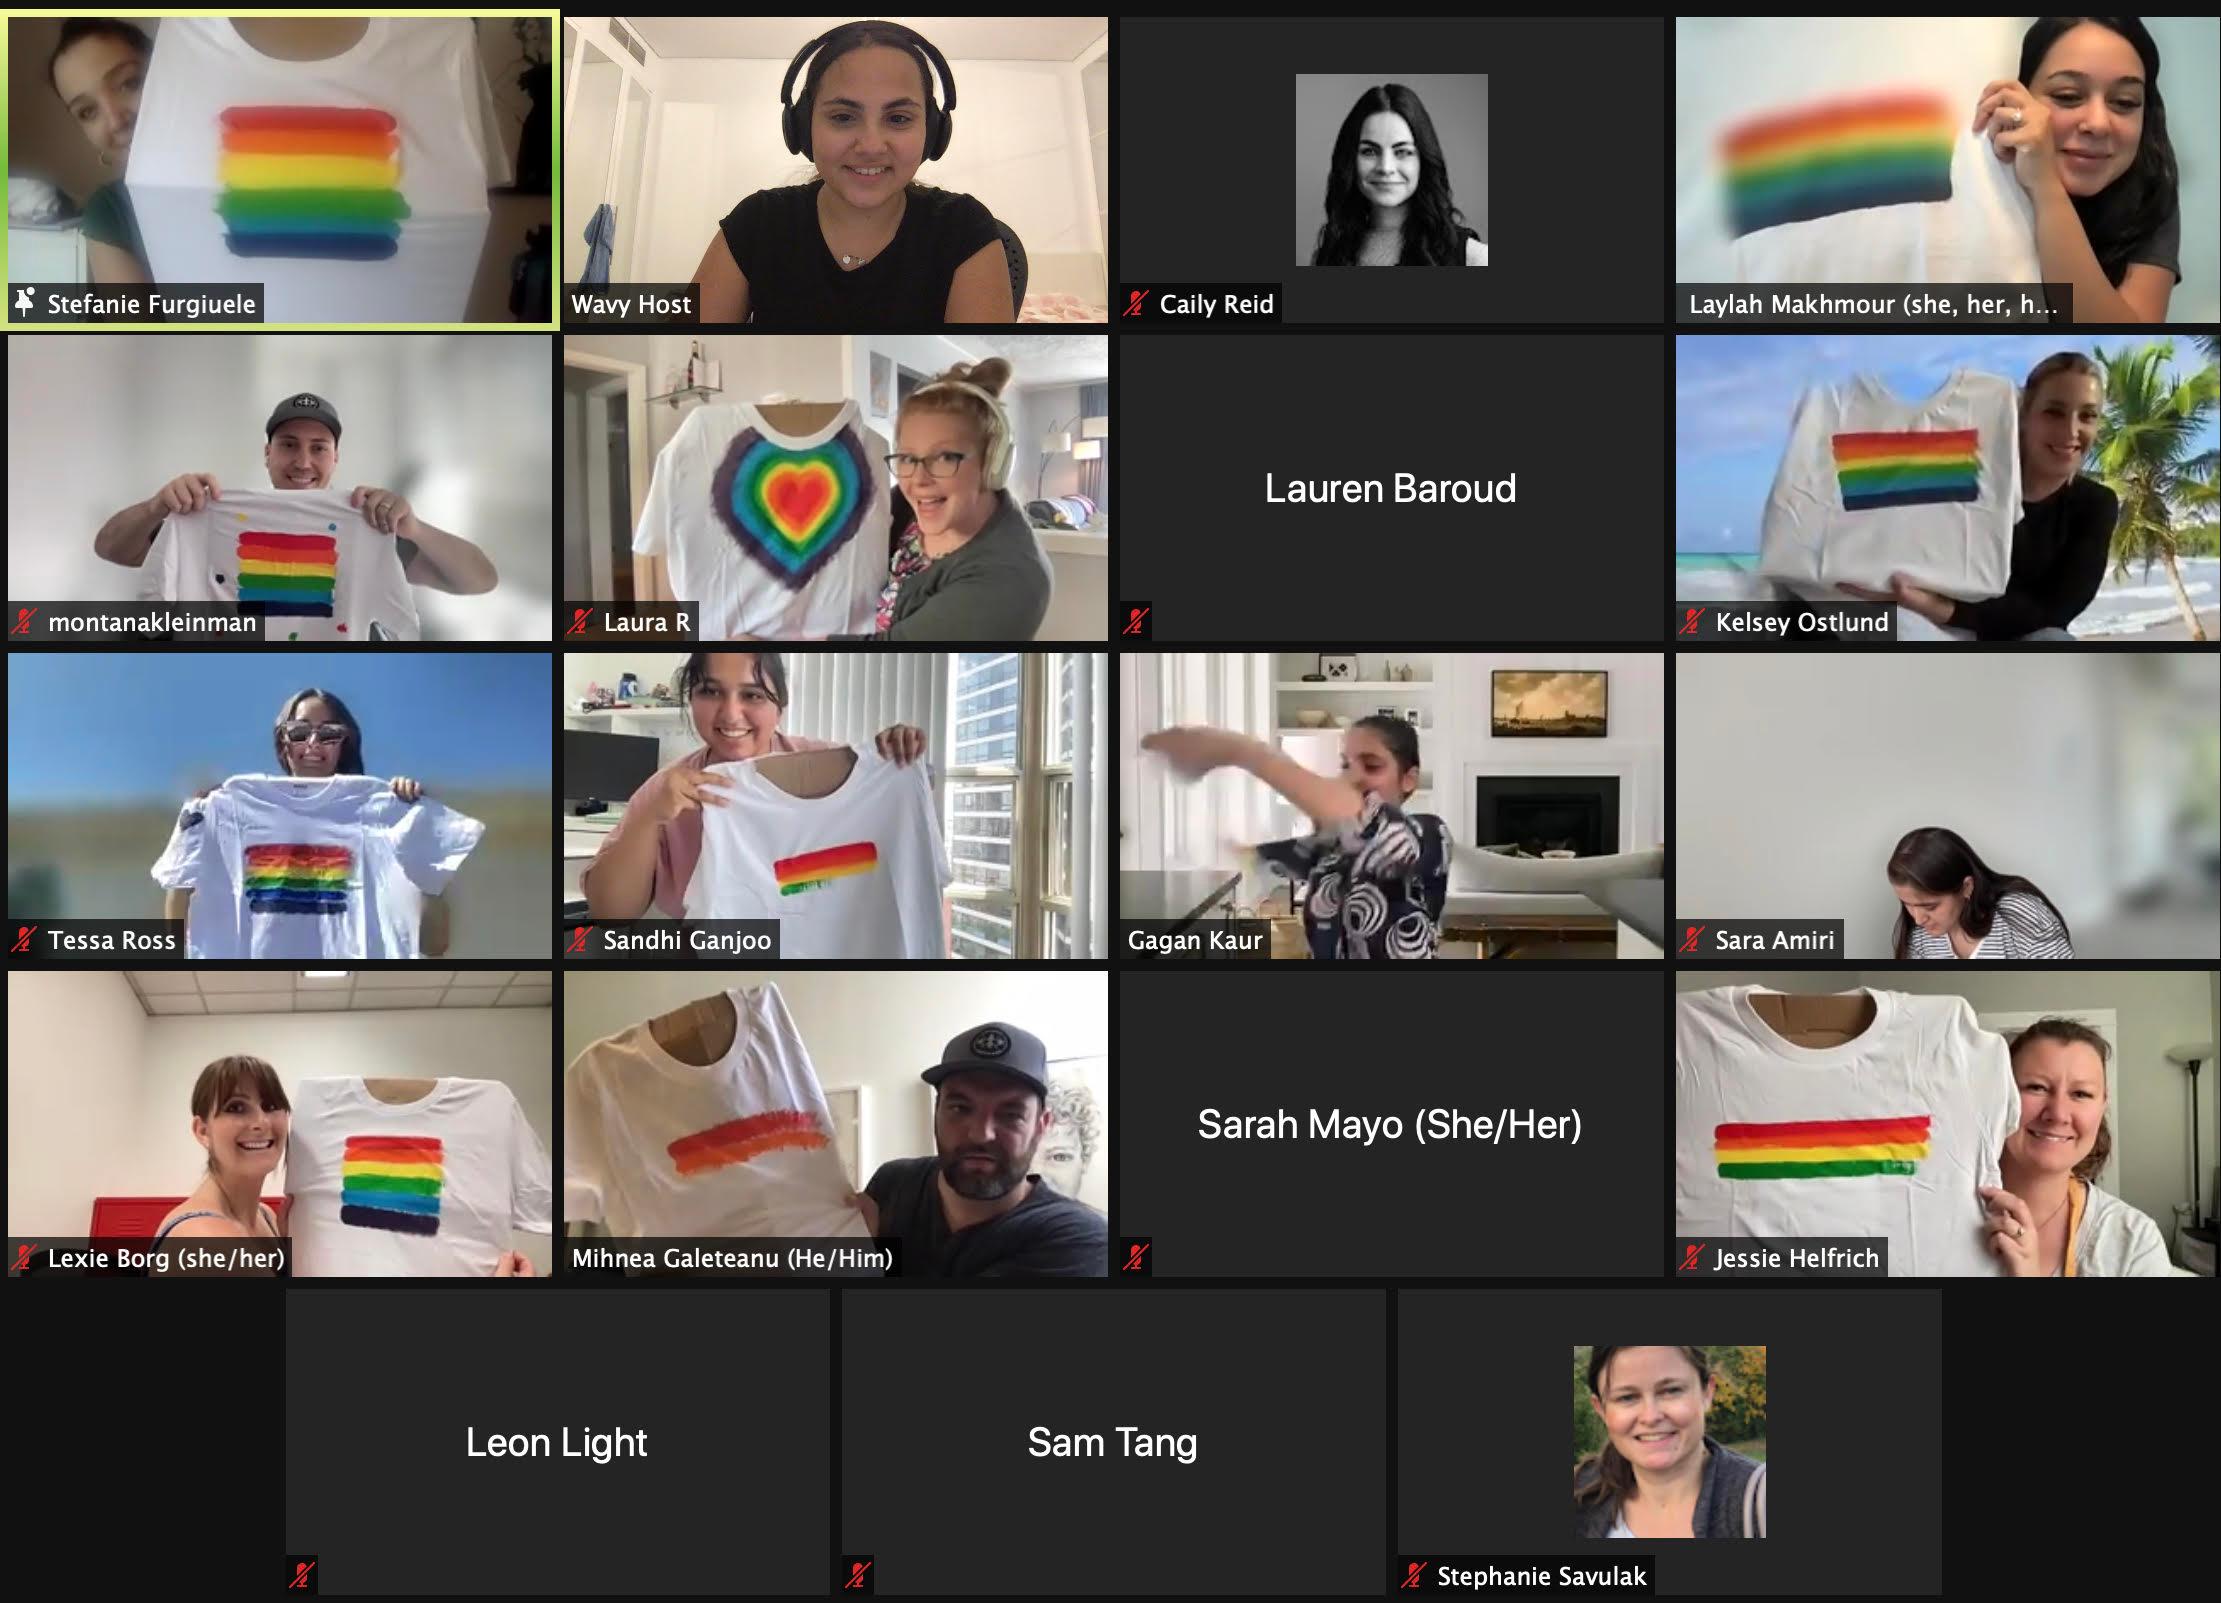 The Coconut Crew at their Pride T-shirt painting event on a Zoom call, showcasing their rainbow-painted shirts and smiling together.